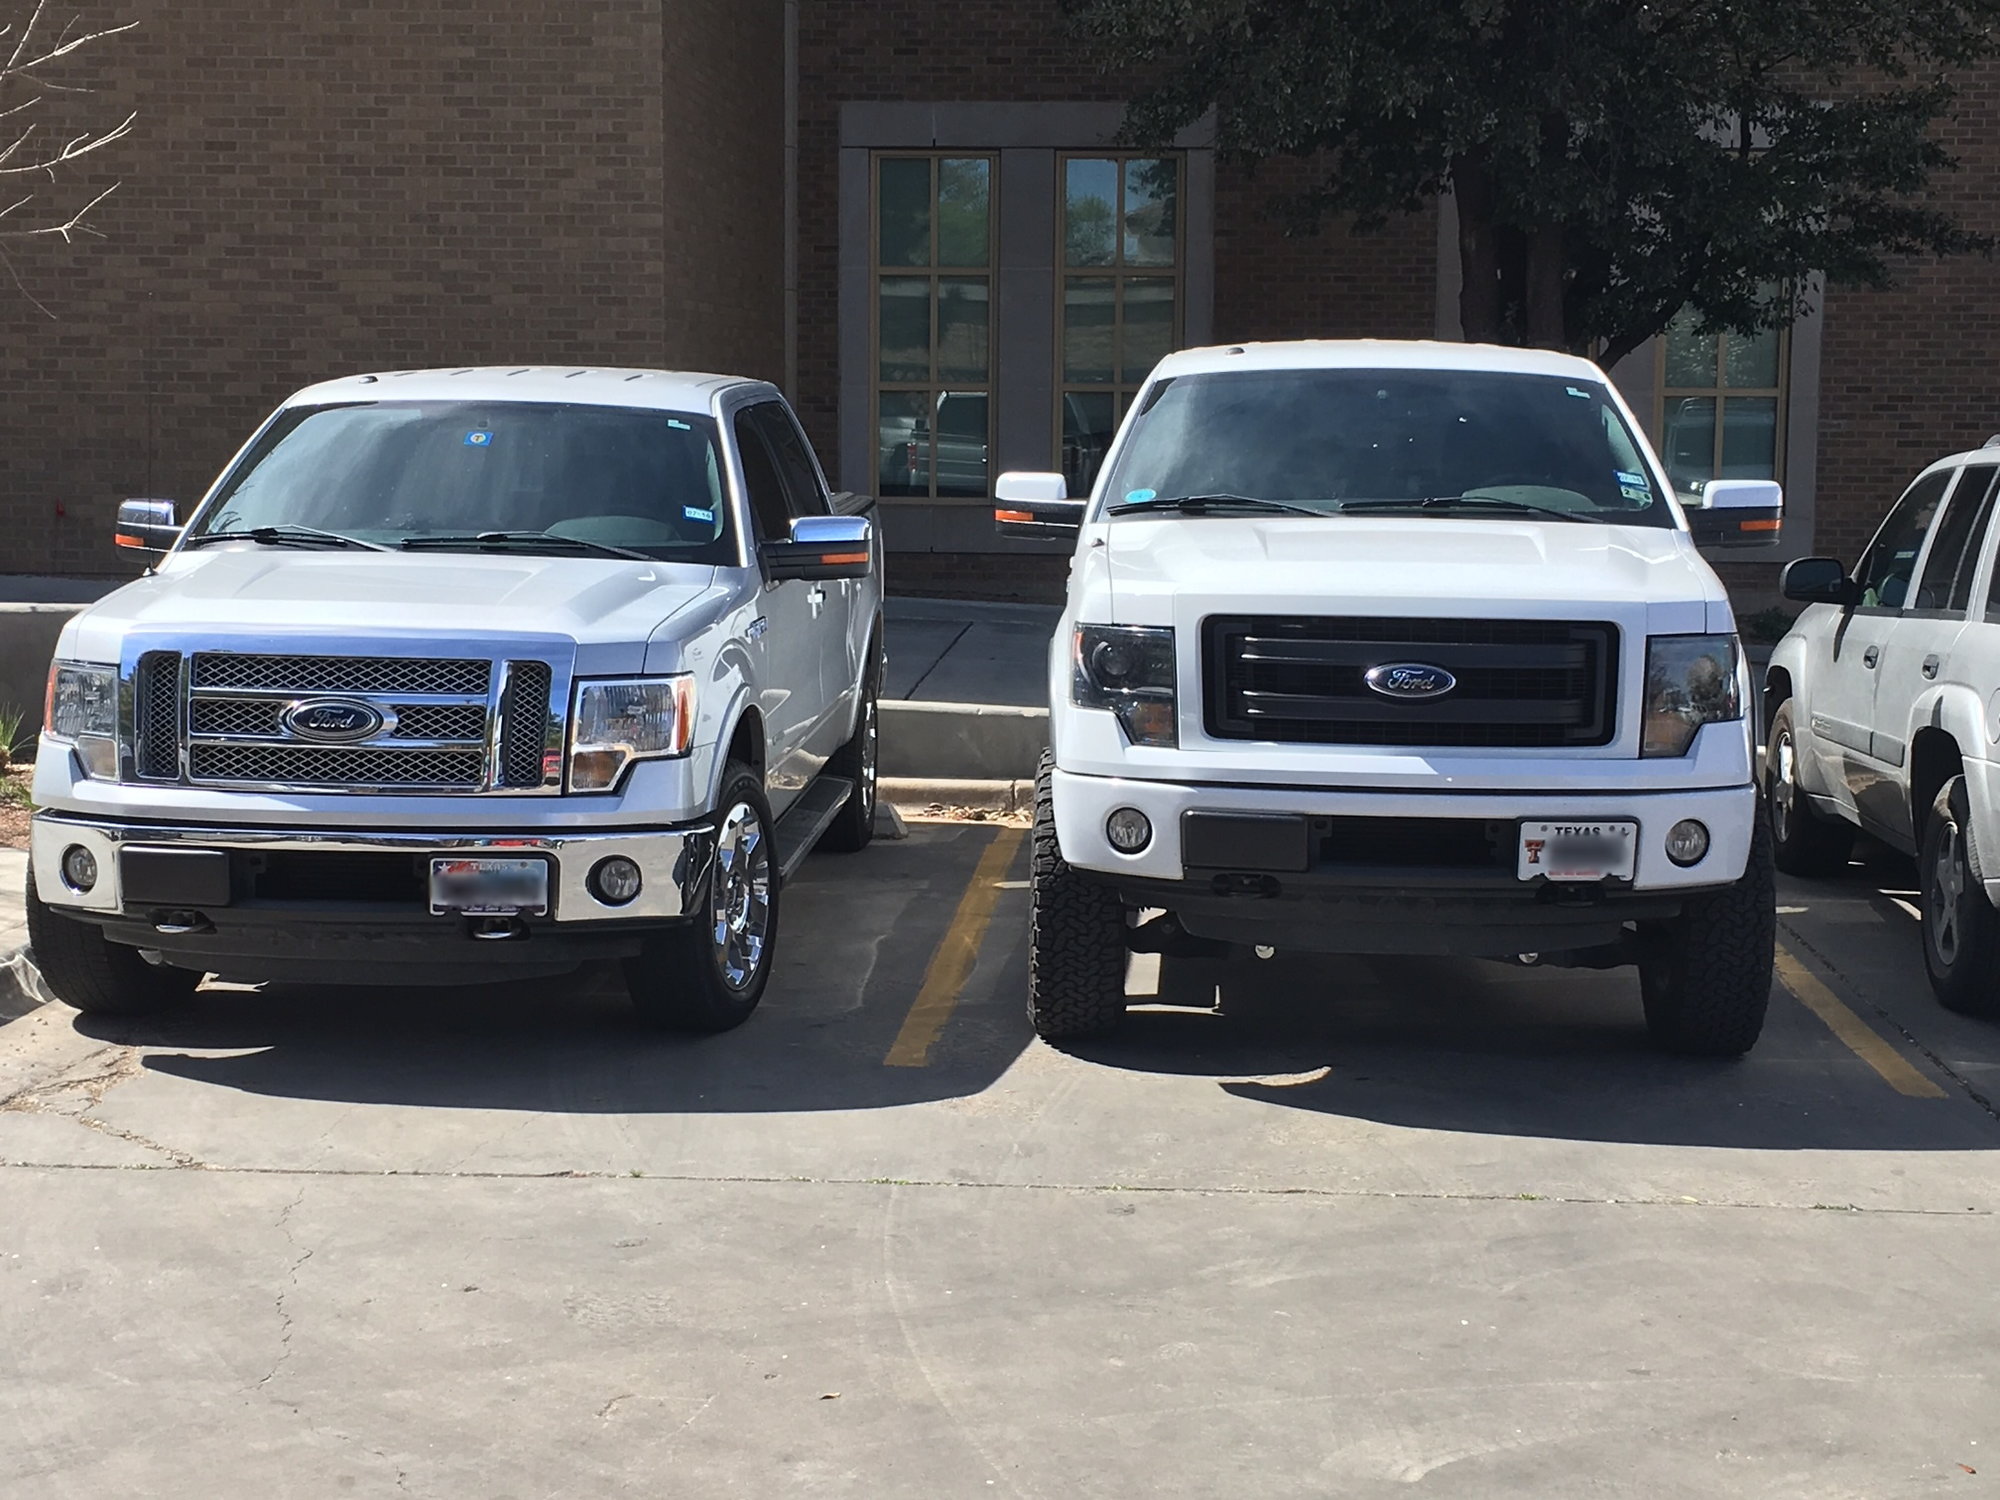 4 inch lift or 6 inch lift - Pro's and Con's - Page 21 - Ford F150 4 Inch Lift Vs 6 Inch Lift